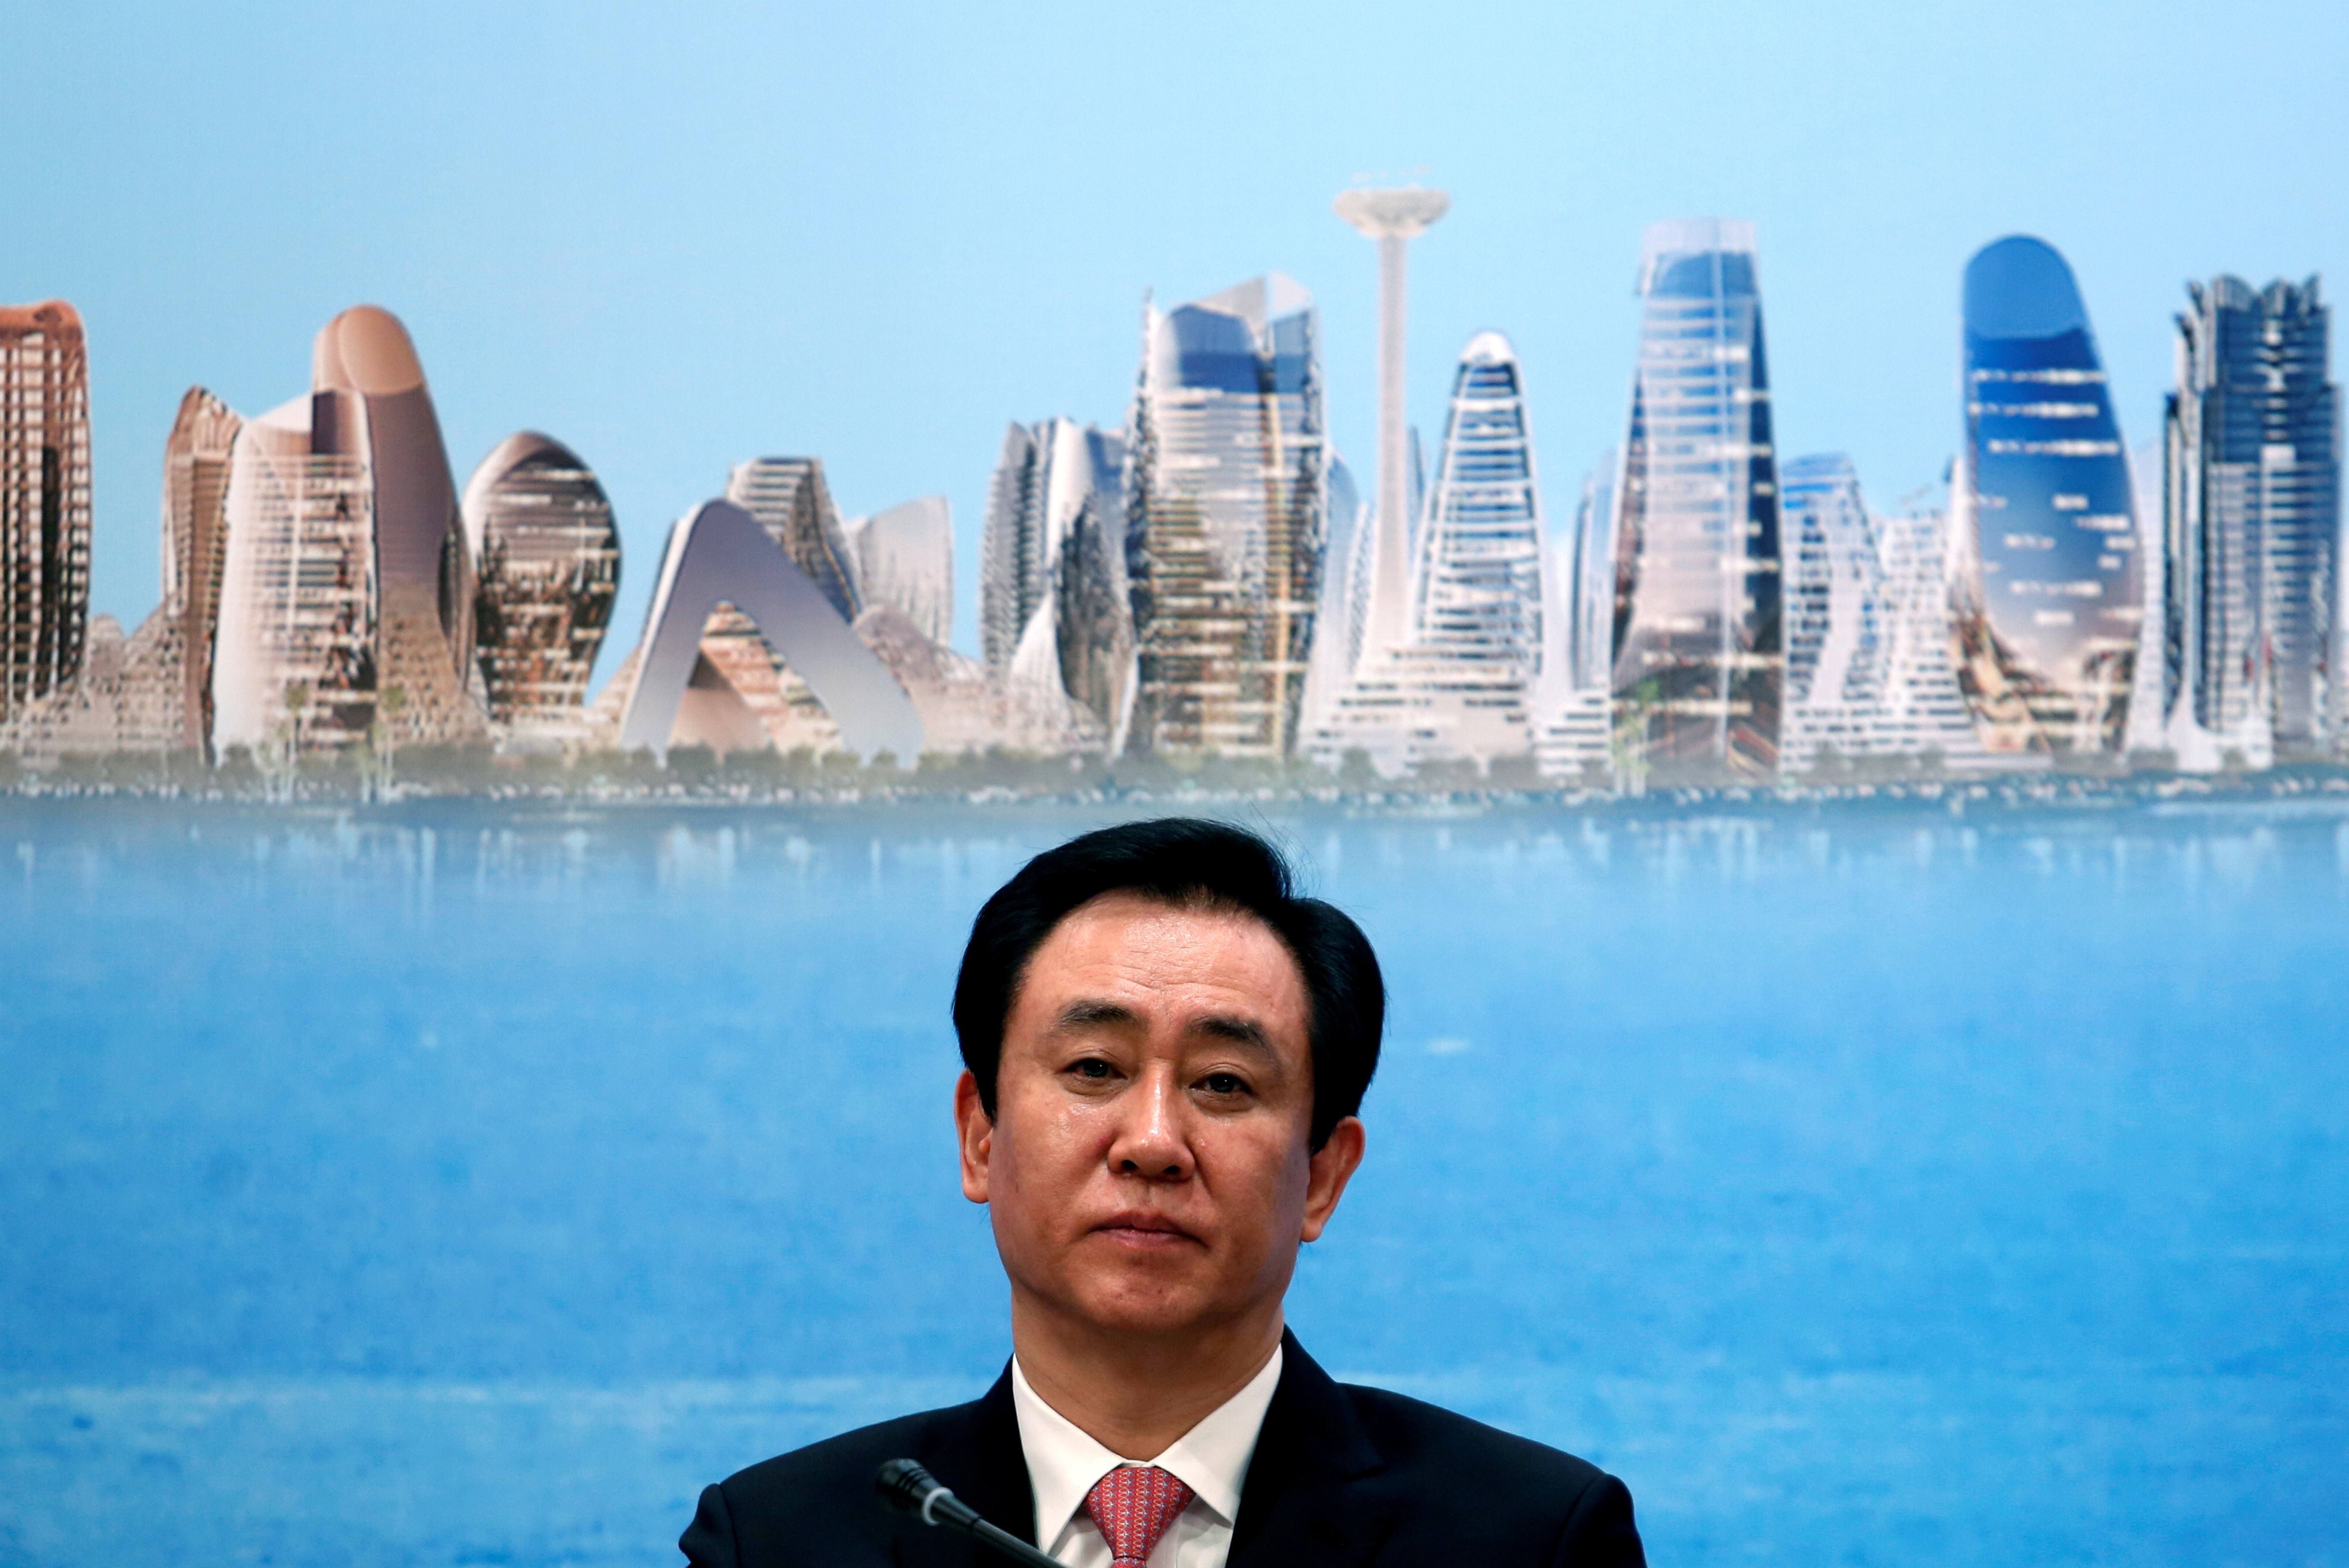 China Evergrande Group Chair Hui Ka Yan attends a press conference on the property developer's annual results in Hong Kong, China March 28, 2017. REUTERS / Bobby Yip / File Photo